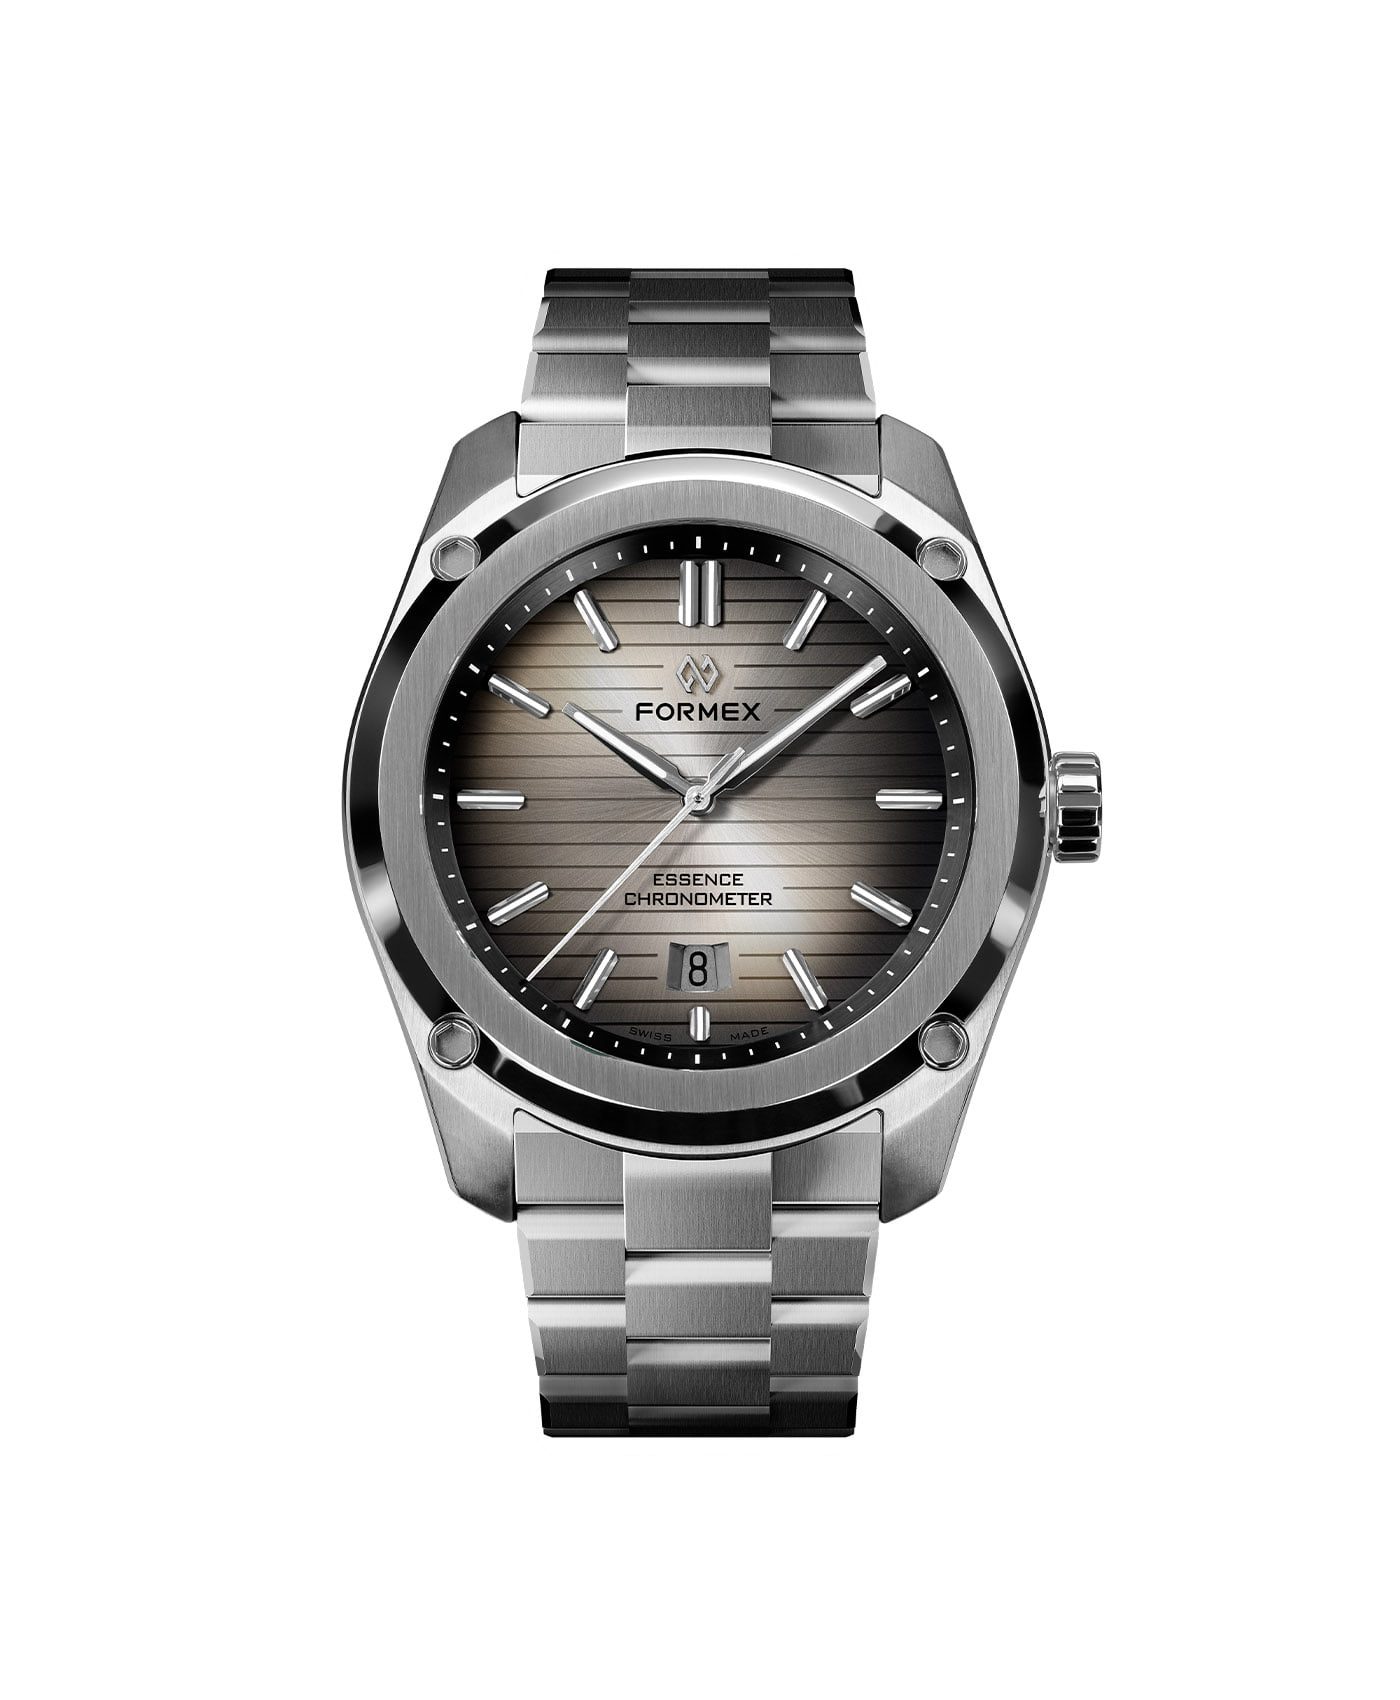 Formex - Essence FortyThree - Automatic Chronometer Degrade dial